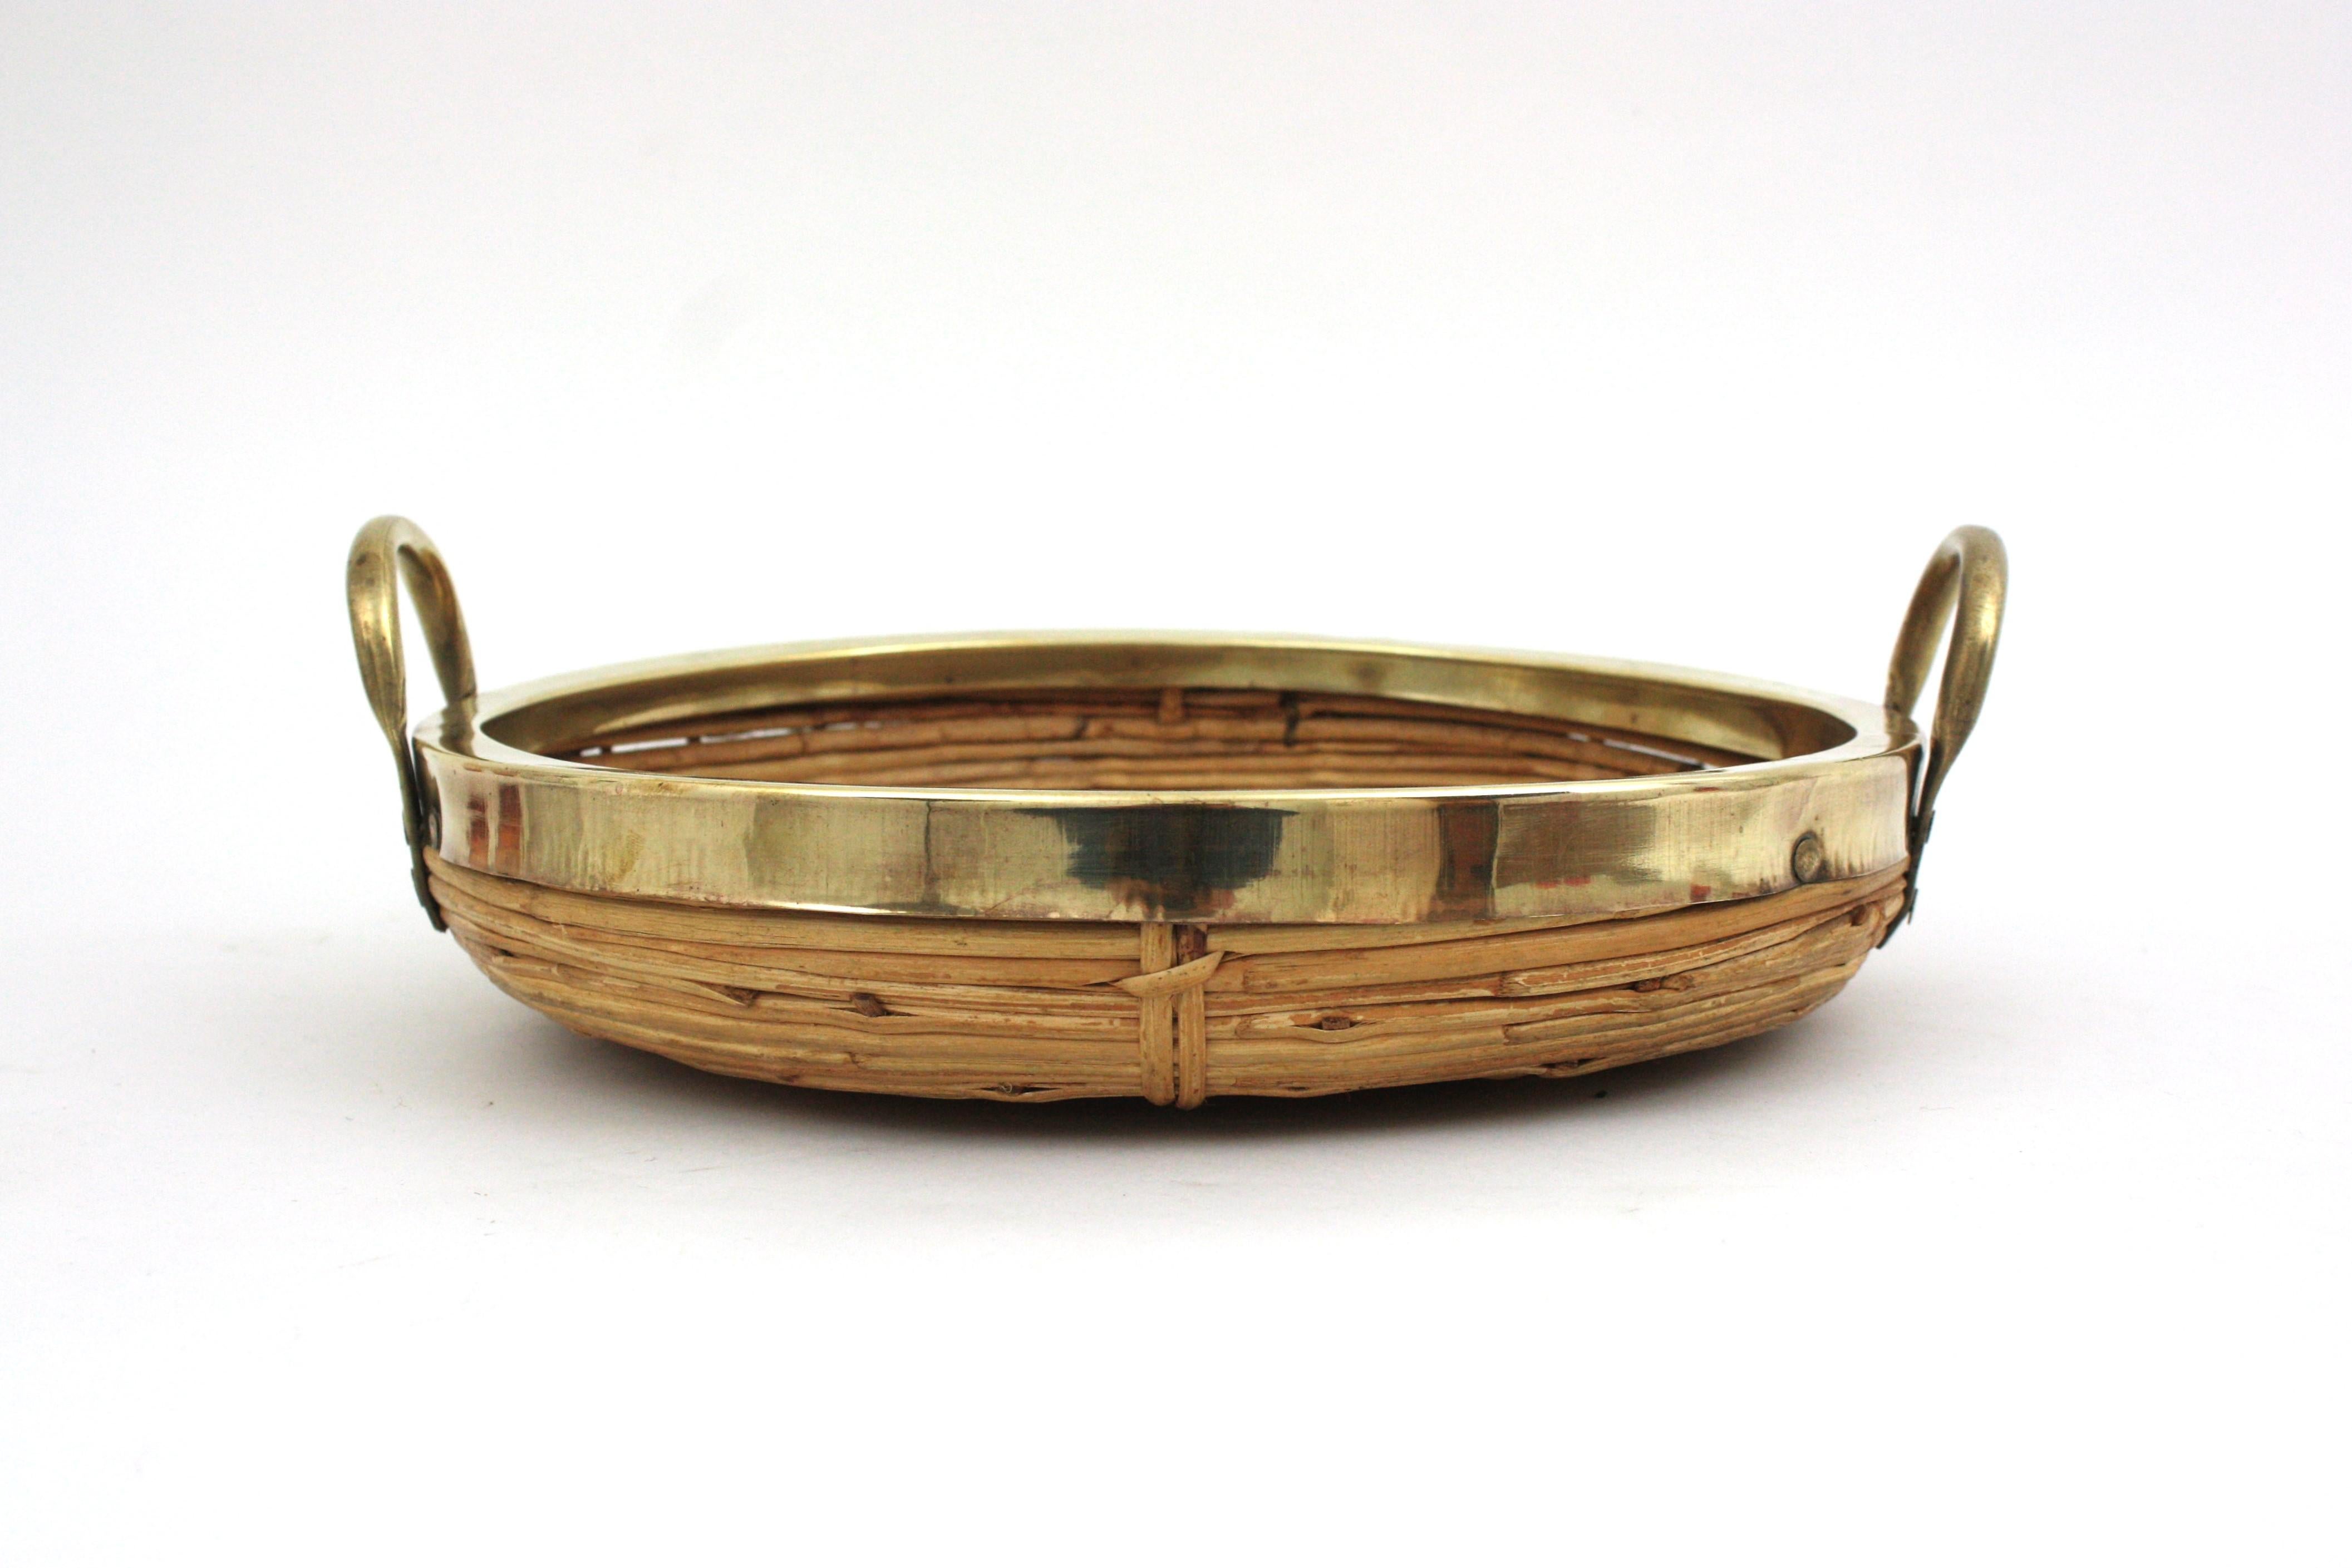 Rattan and Brass Italian Centerpiece Tray Basket, 1970s For Sale 4